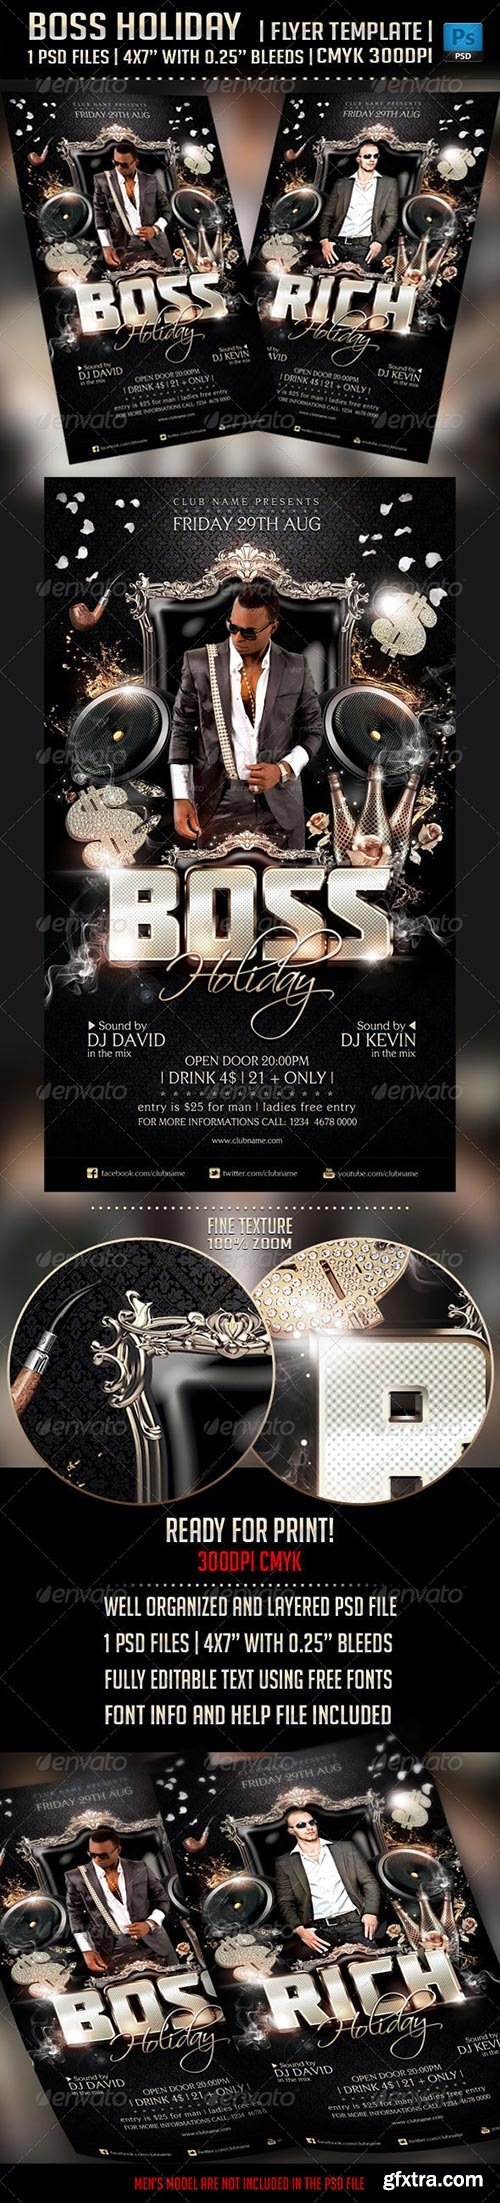 GraphicRiver - Boss Holiday Flyer Template